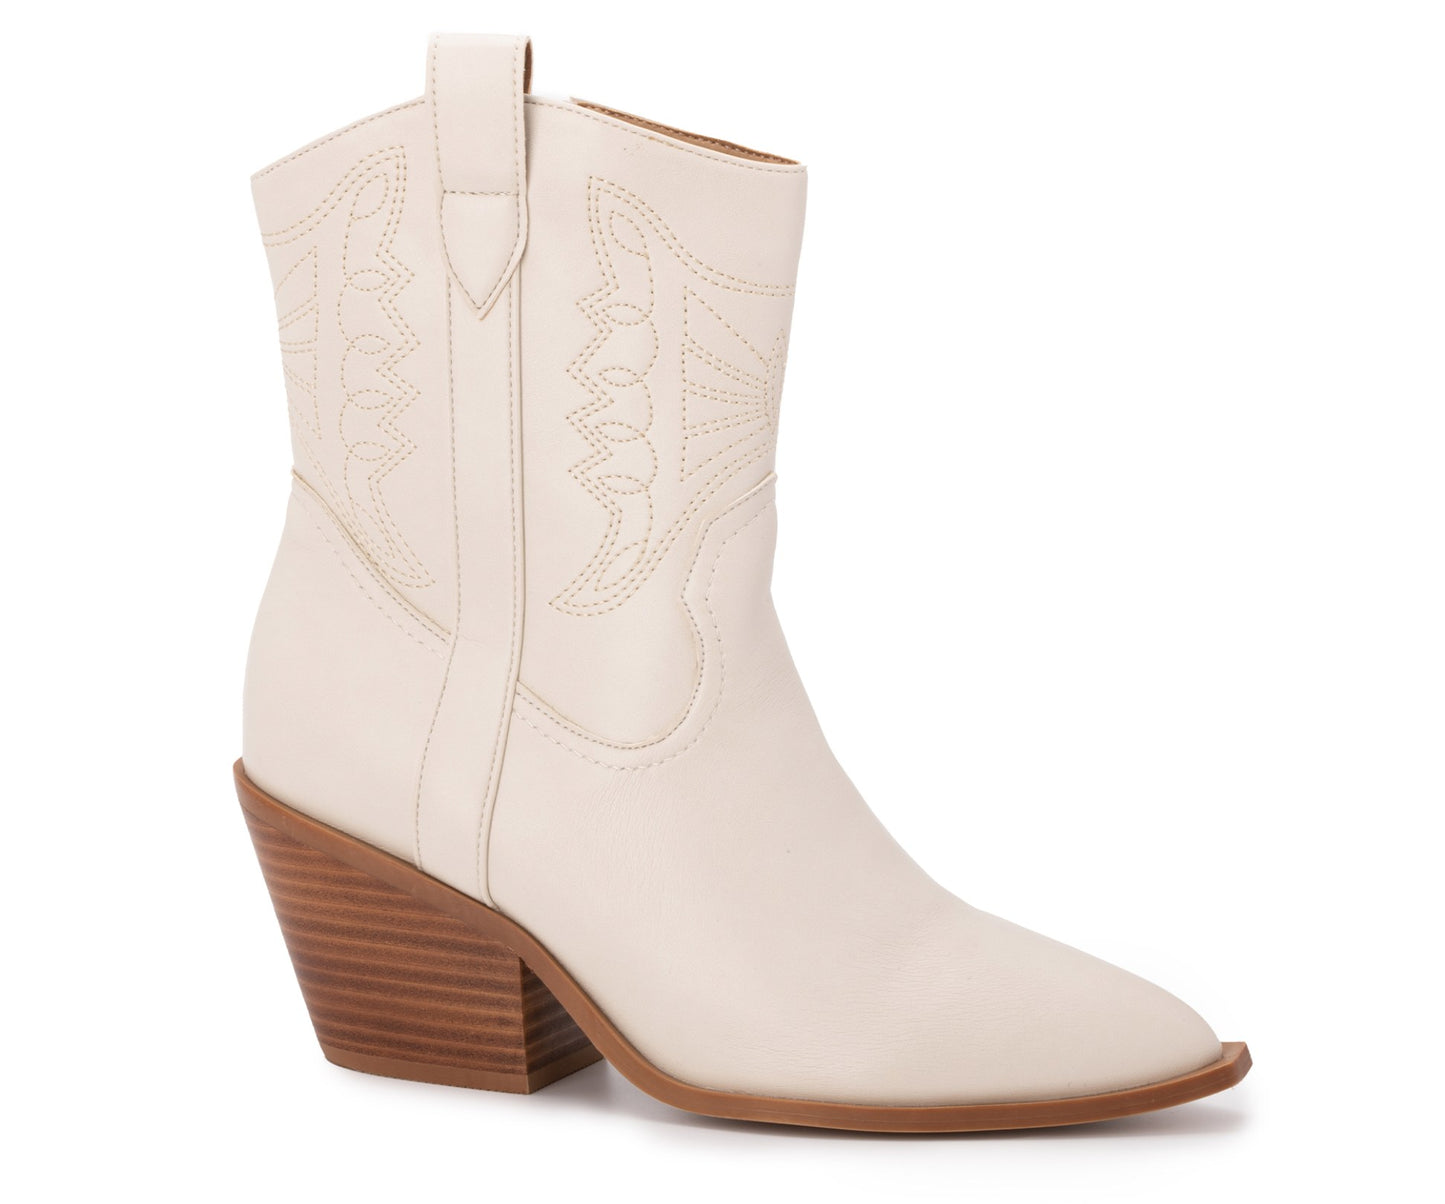 Corkys Rowdy Boots in Winter White